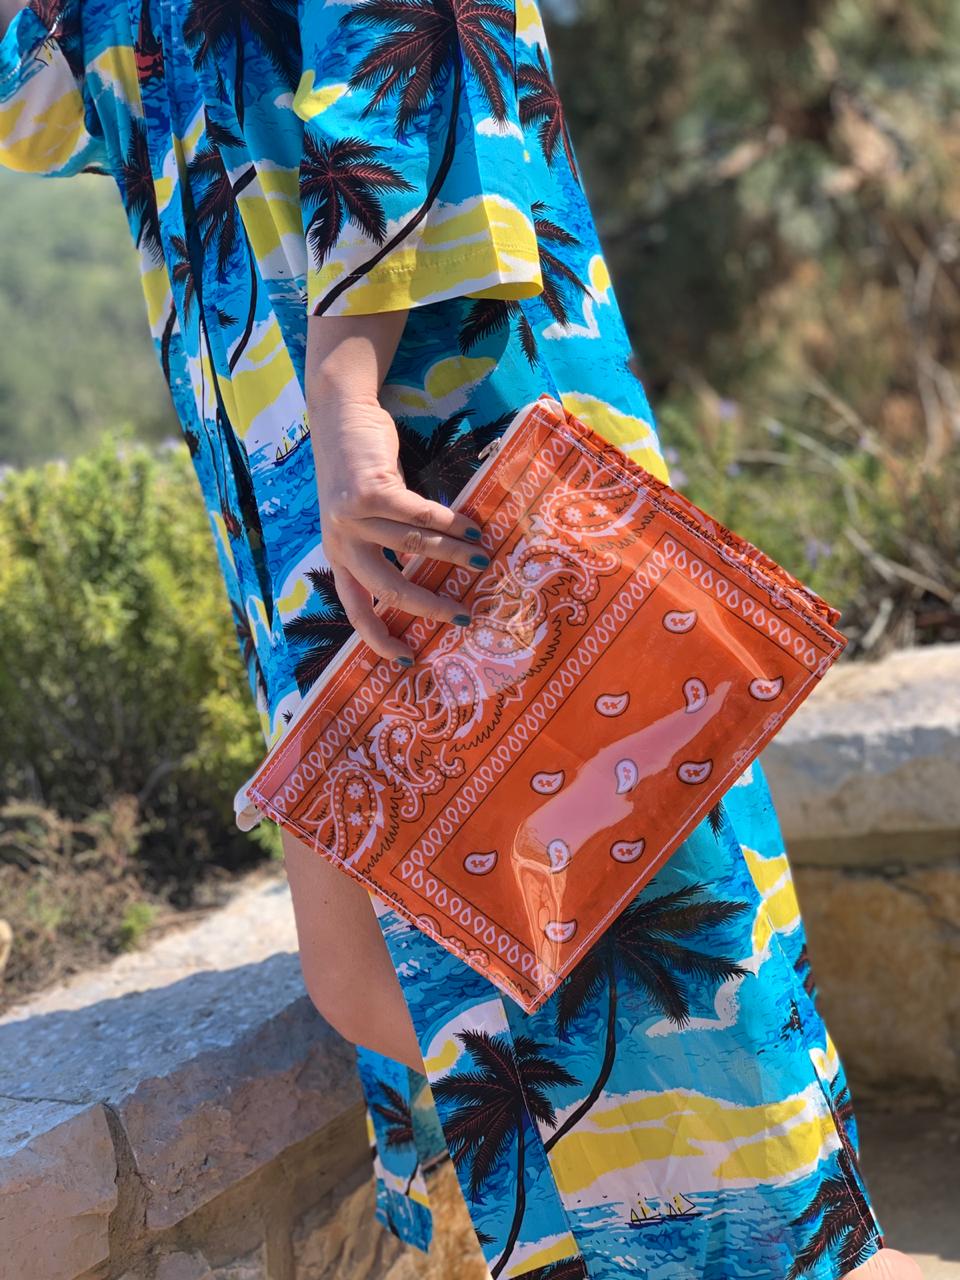 Bandana clutch – Bits and pieces to go